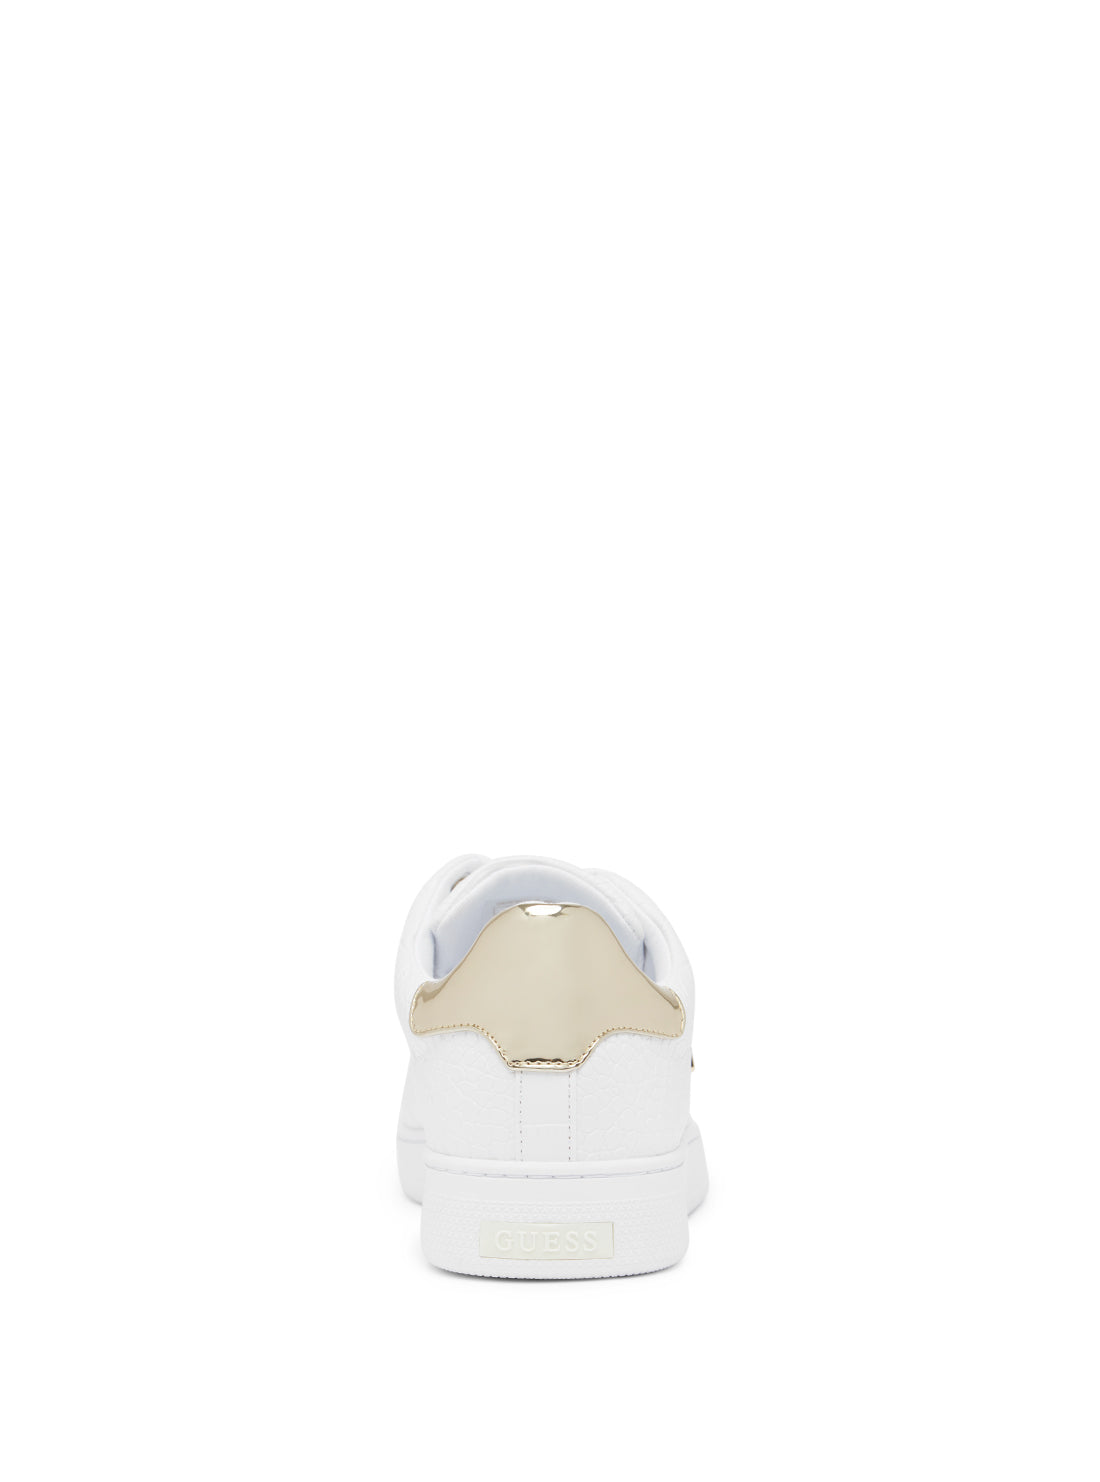 White Reshy-A Sneakers | GUESS Women's Shoes | back view